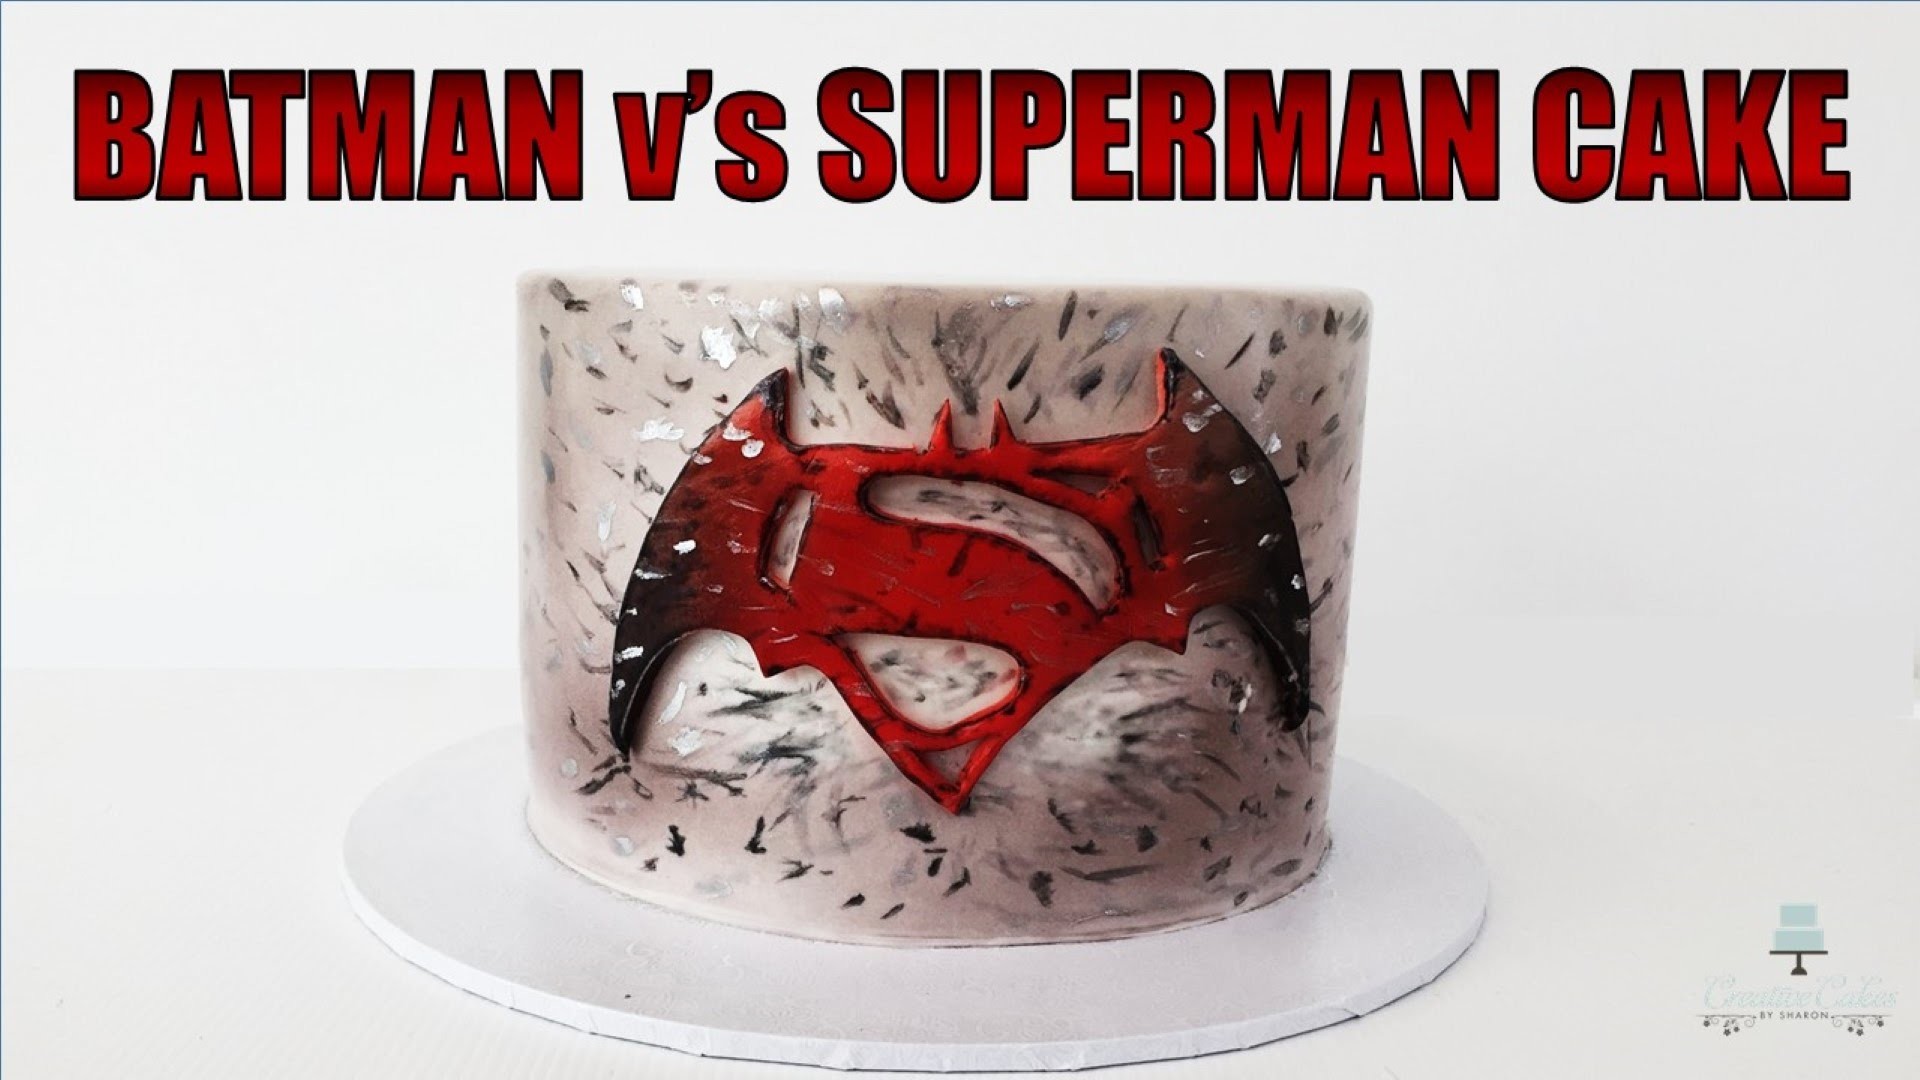 Batman v's Superman Cake | How to make from Creative Cakes by Sharon